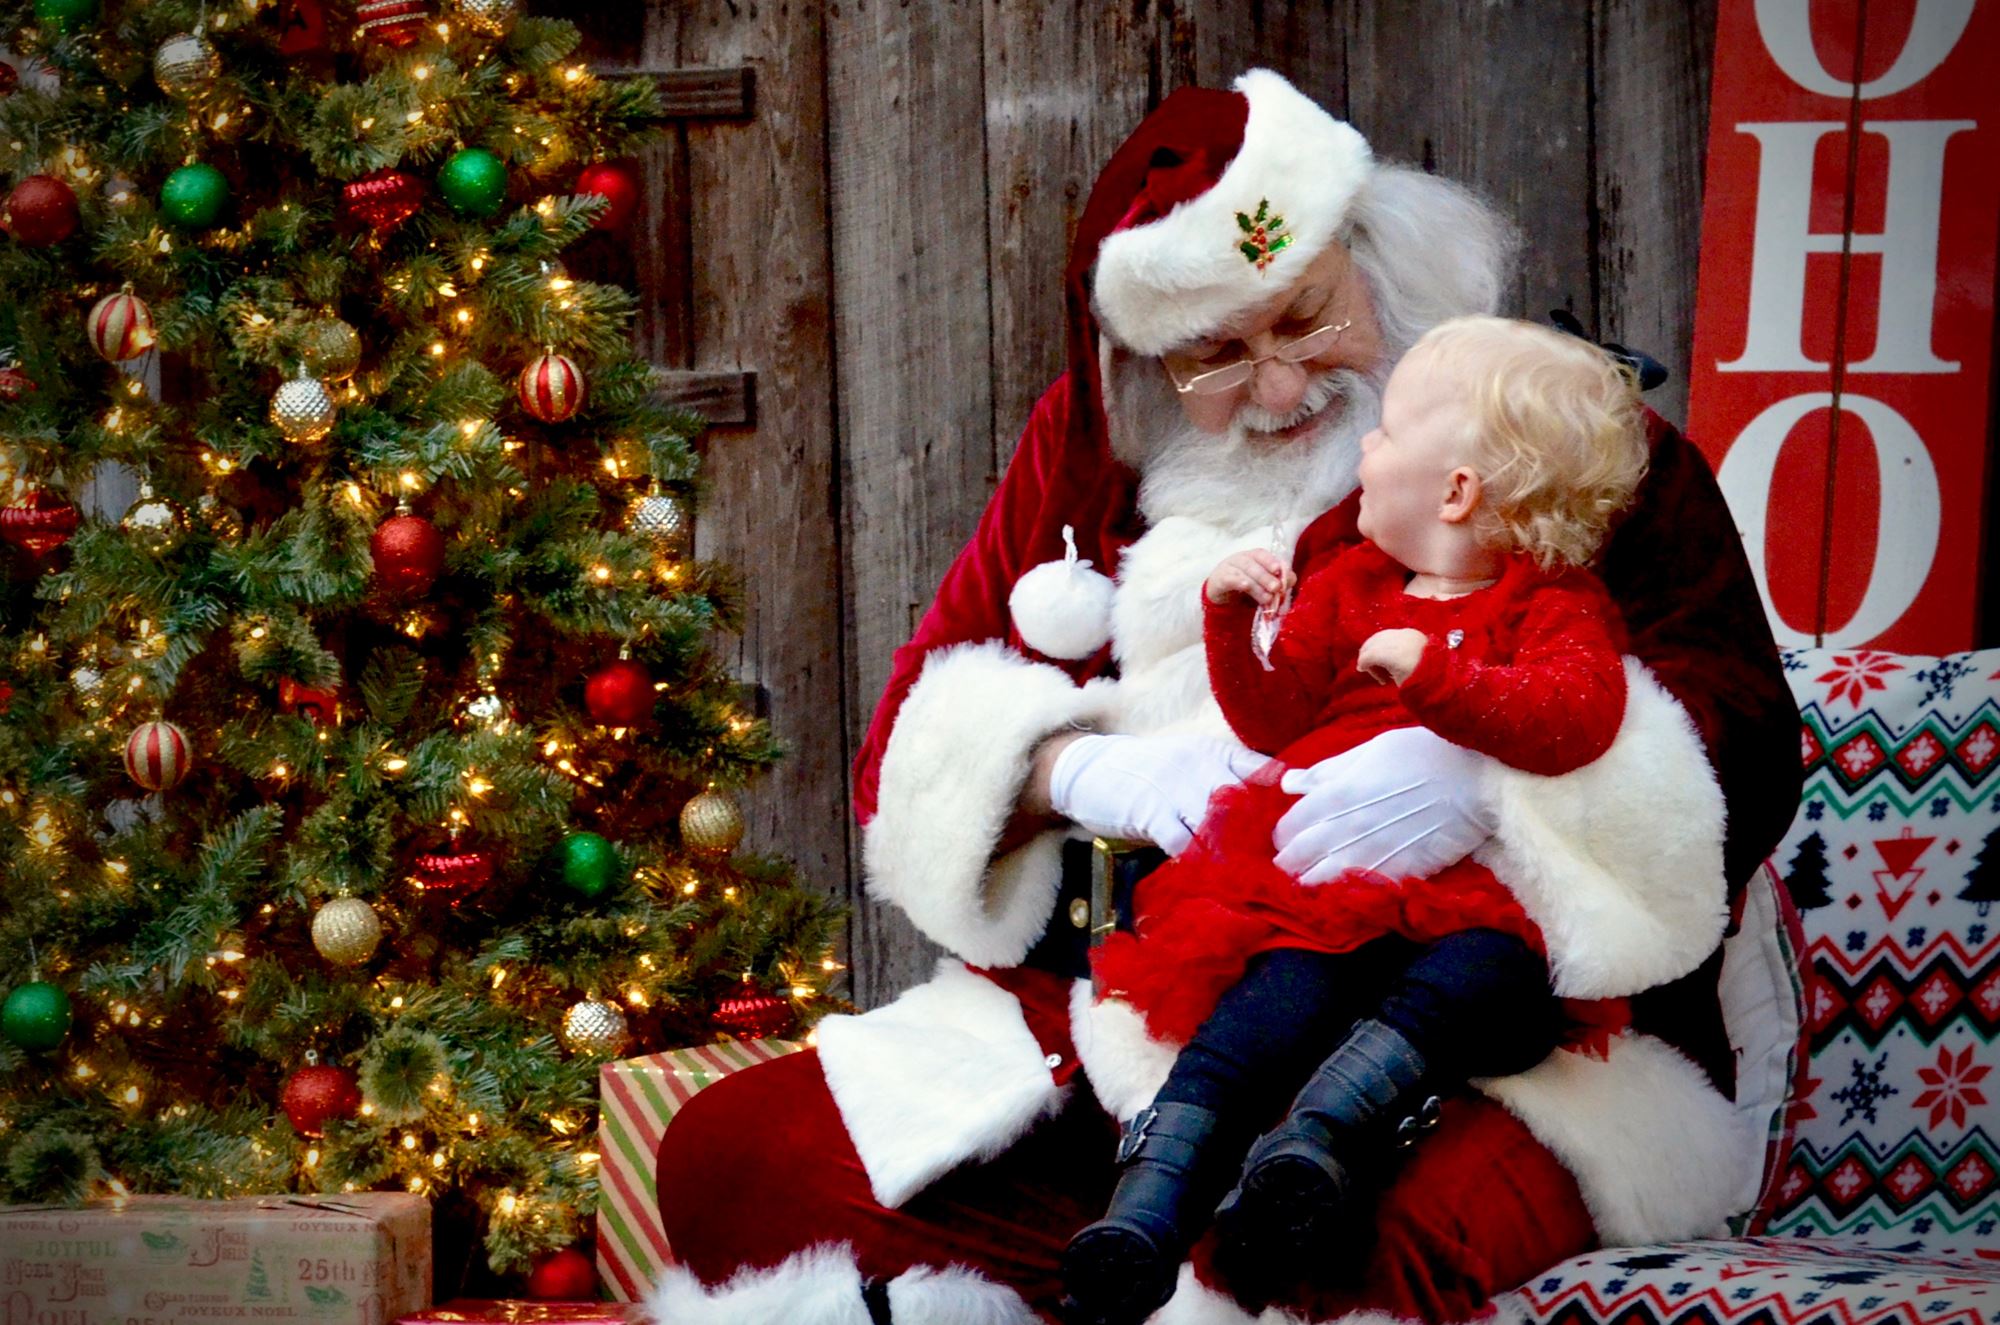 Santa Claus with a small child on his lap. Christmas tree in background.